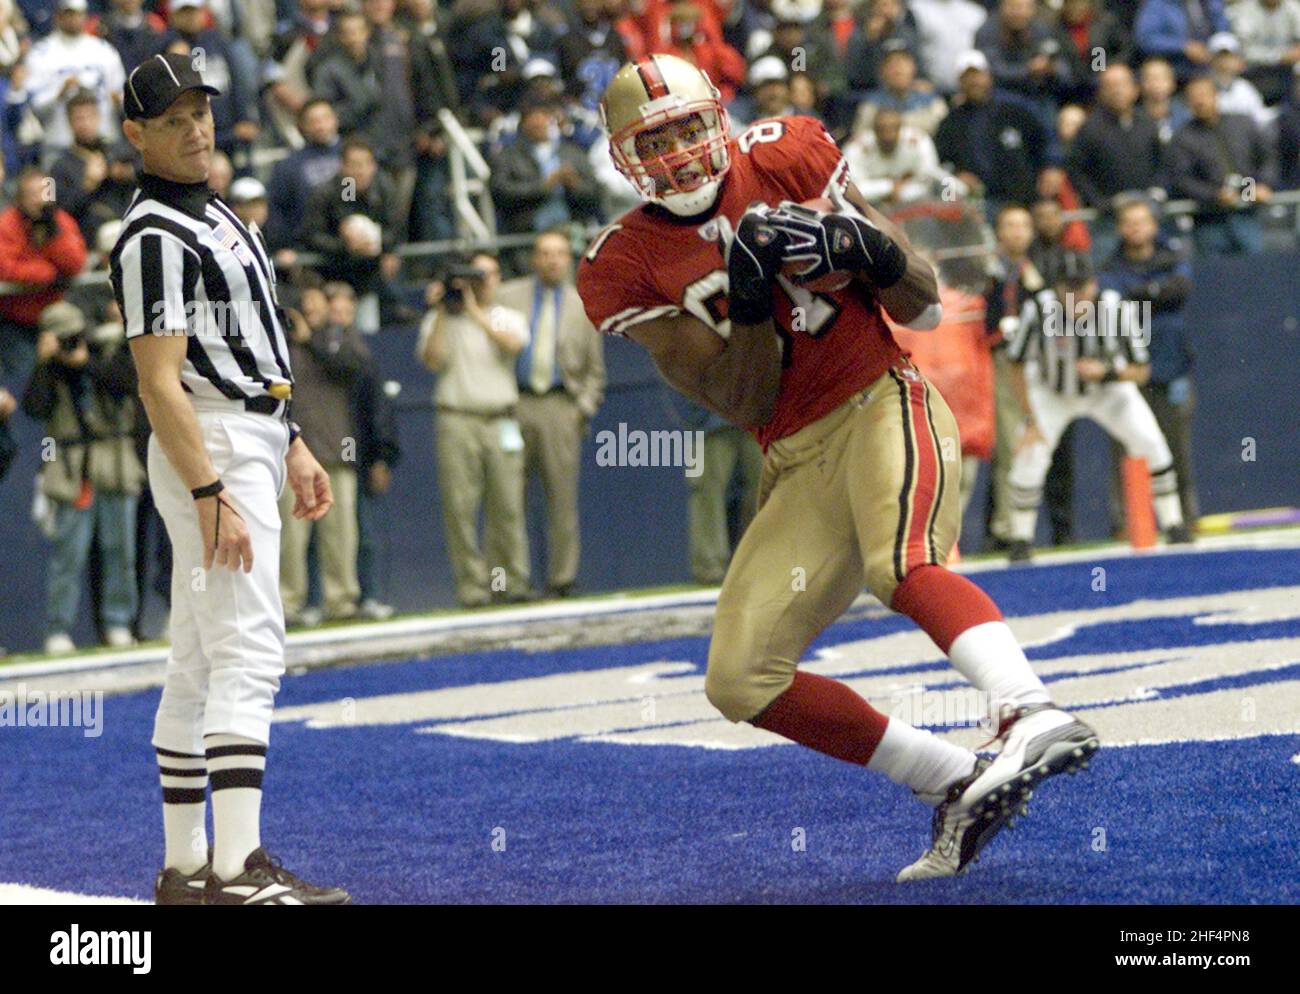 Irving, USA. 08th Dec, 2002. San Francisco 49ers' Terrell Owens pulls in a fourth quarter touchdown against the Dallas Cowboys as the 49ers beat the Cowboys 31-27 Sunday Dec. 8, 2002 in Irving, Texas. (Photo by Rick Moon/Fort Worth Star-Telegram/TNS/Sipa USA) Credit: Sipa USA/Alamy Live News Stock Photo